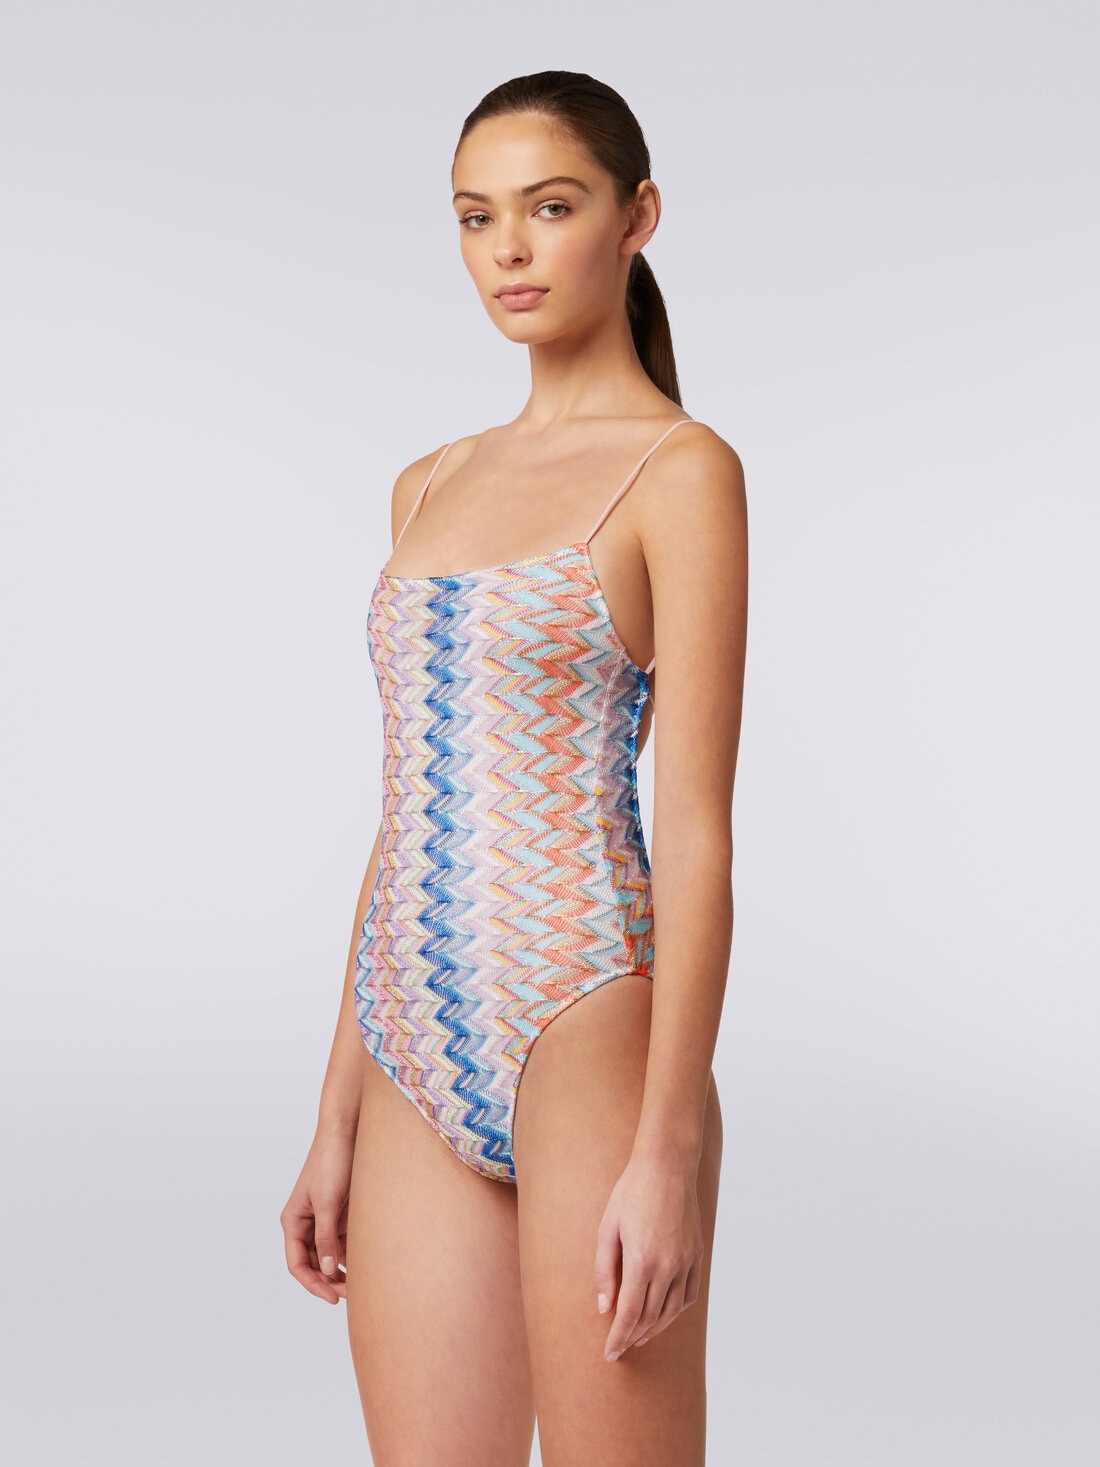 One-piece lamé swimming costume with thin adjustable straps, Multicoloured  - MC23SP03BR00XHSM9D8 - 2